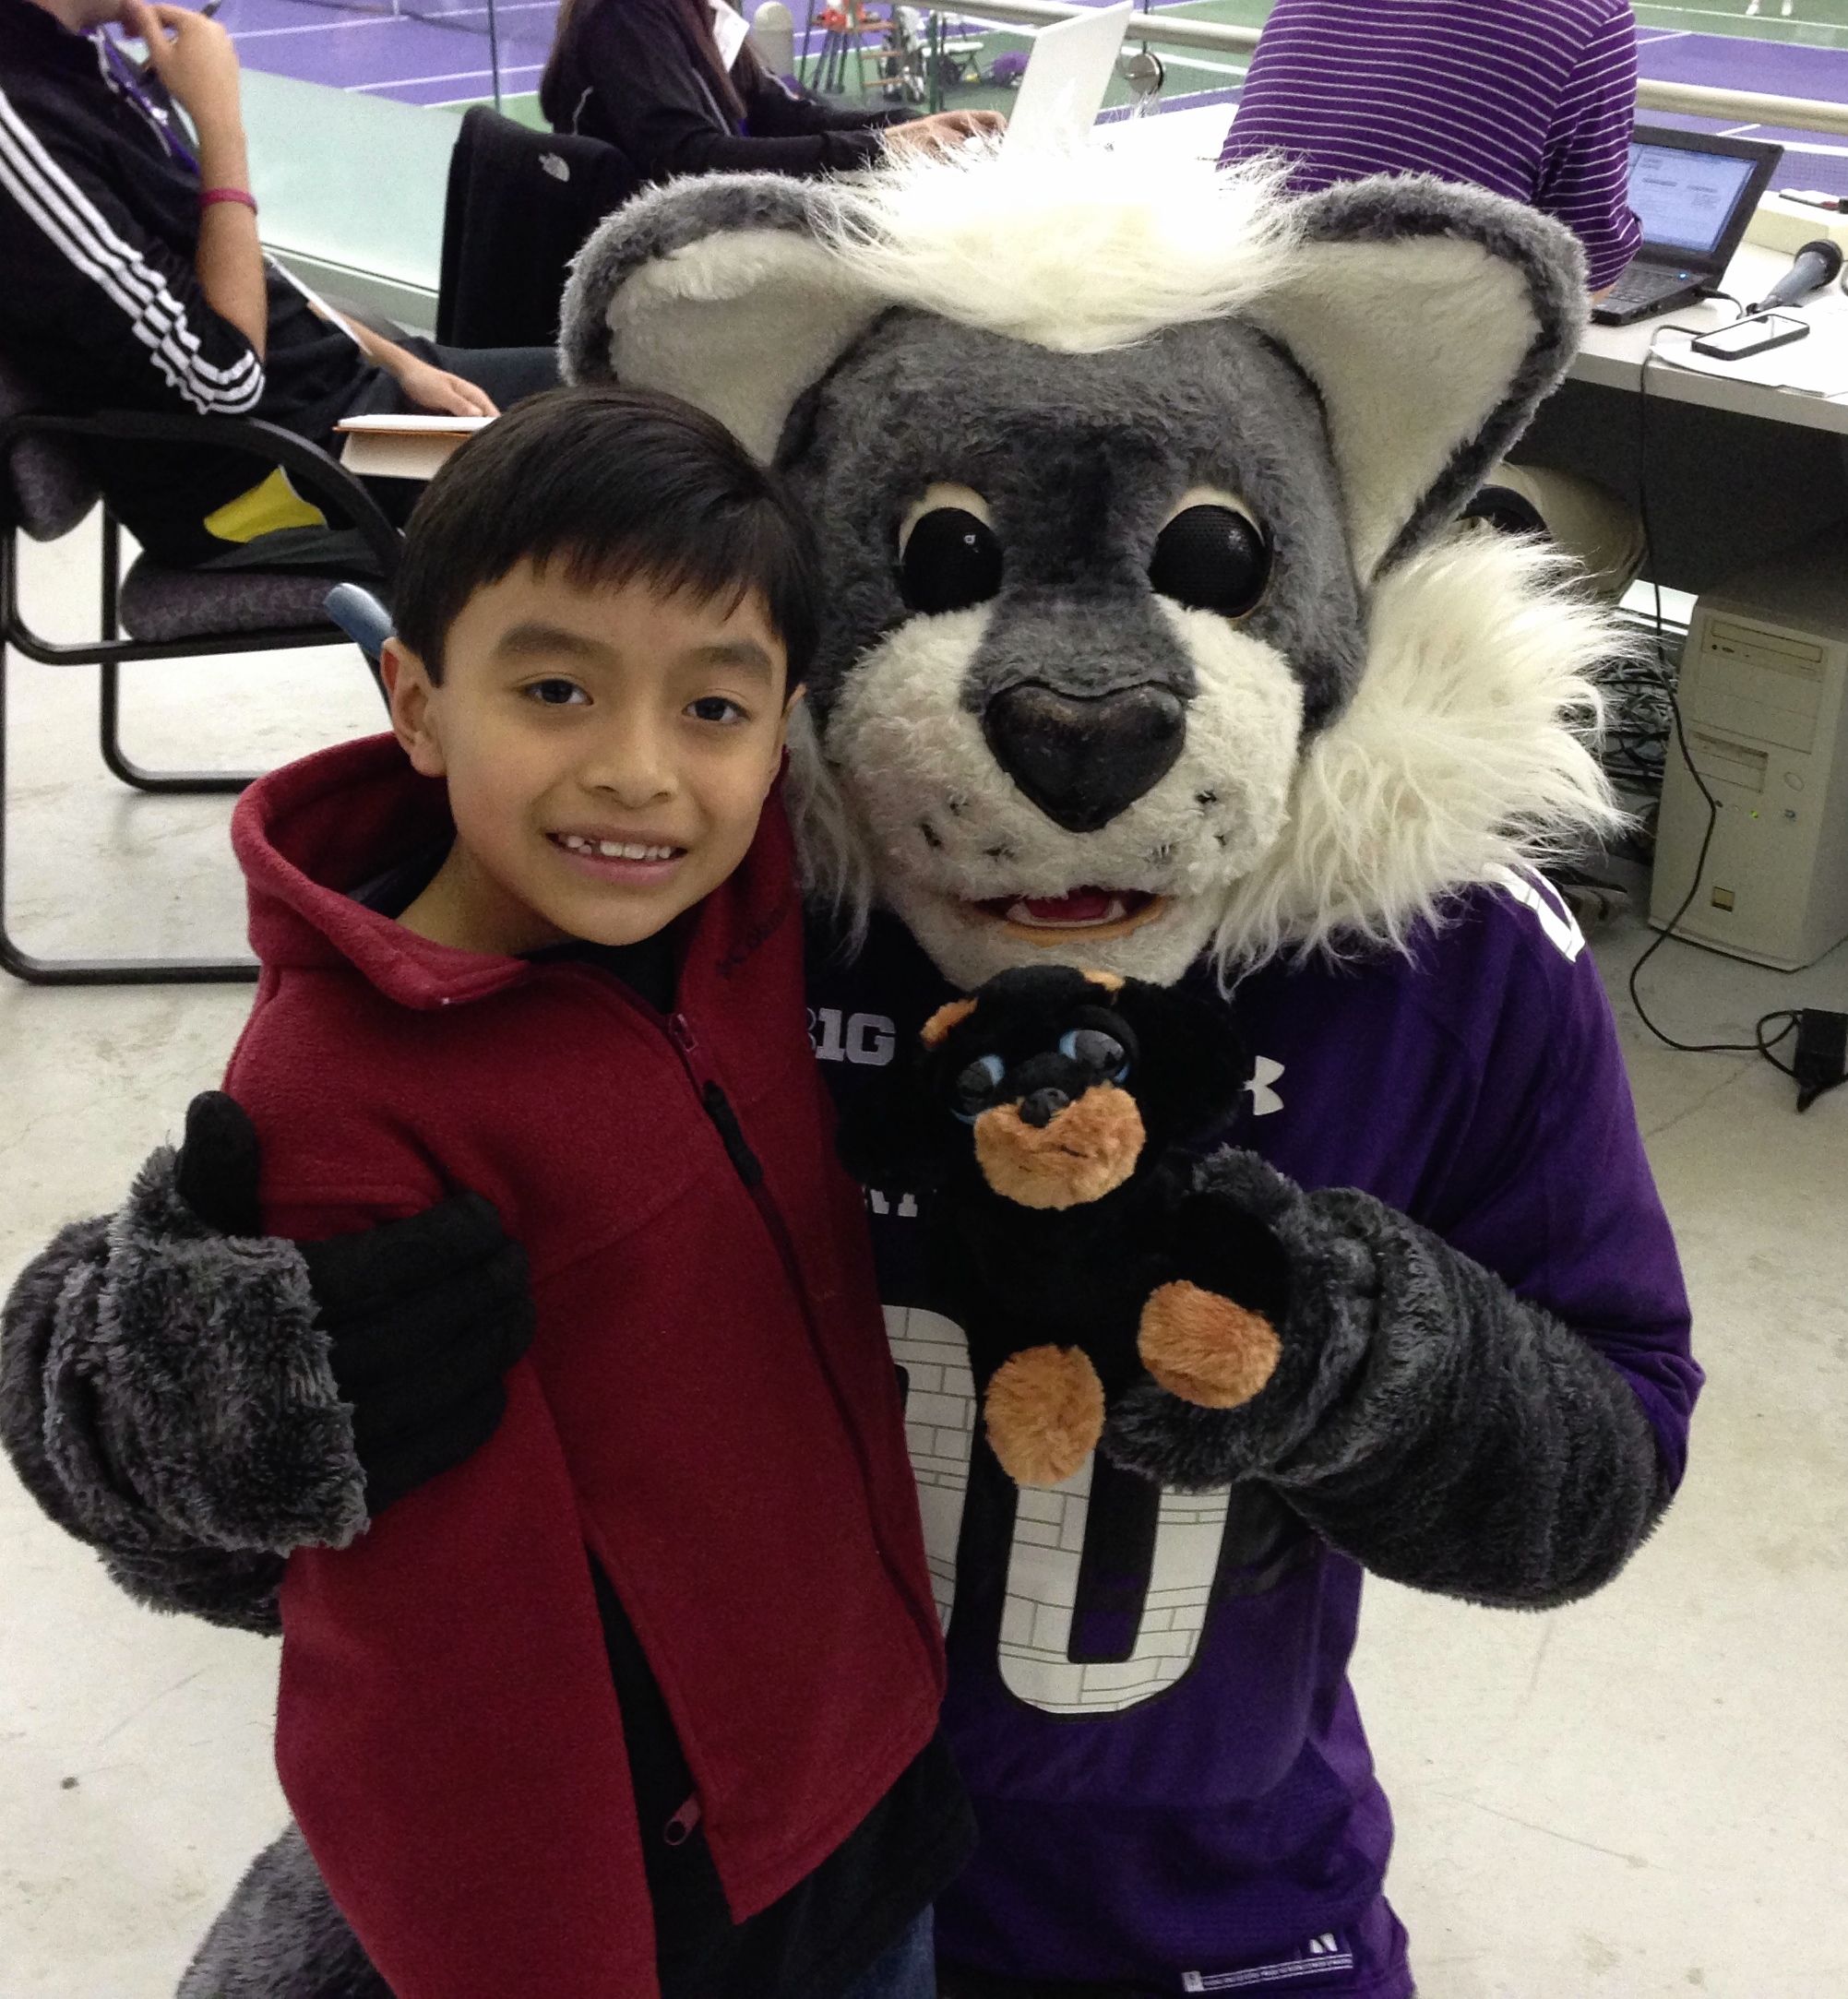 Young Fan with Willie the Wildcat